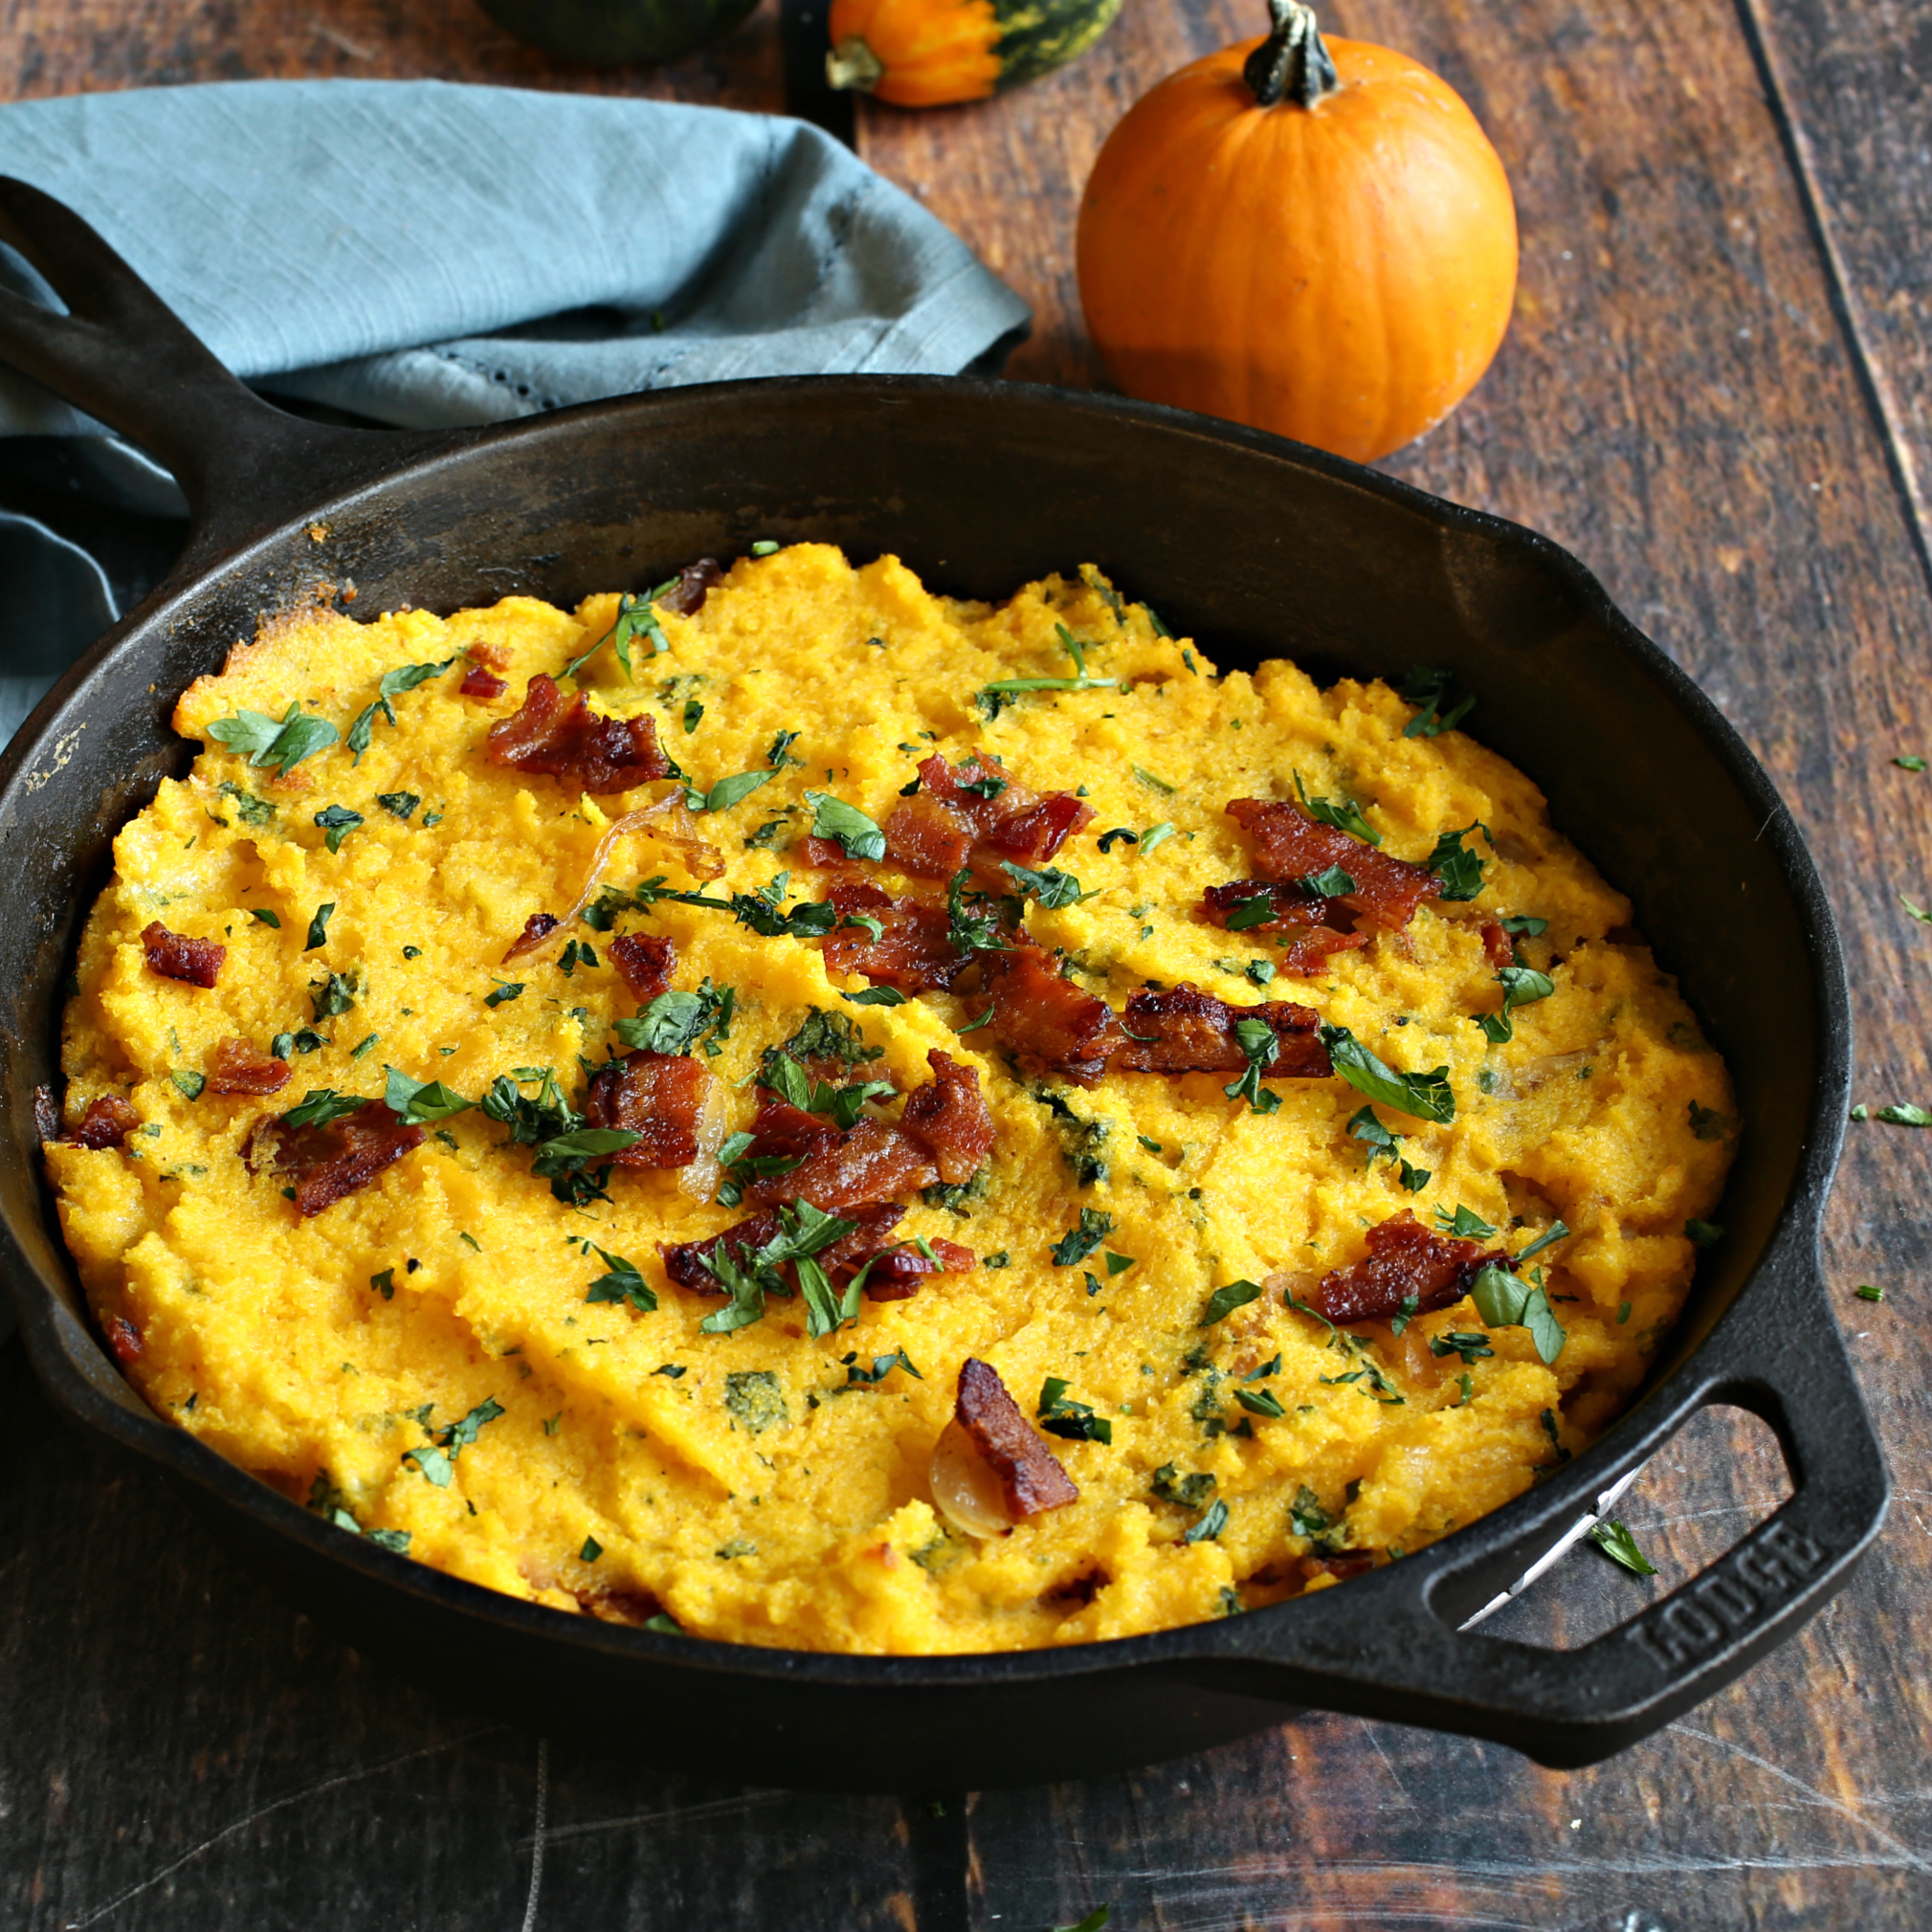 Recipe for a side dish of creamy baked cornmeal with bacon and cheese.